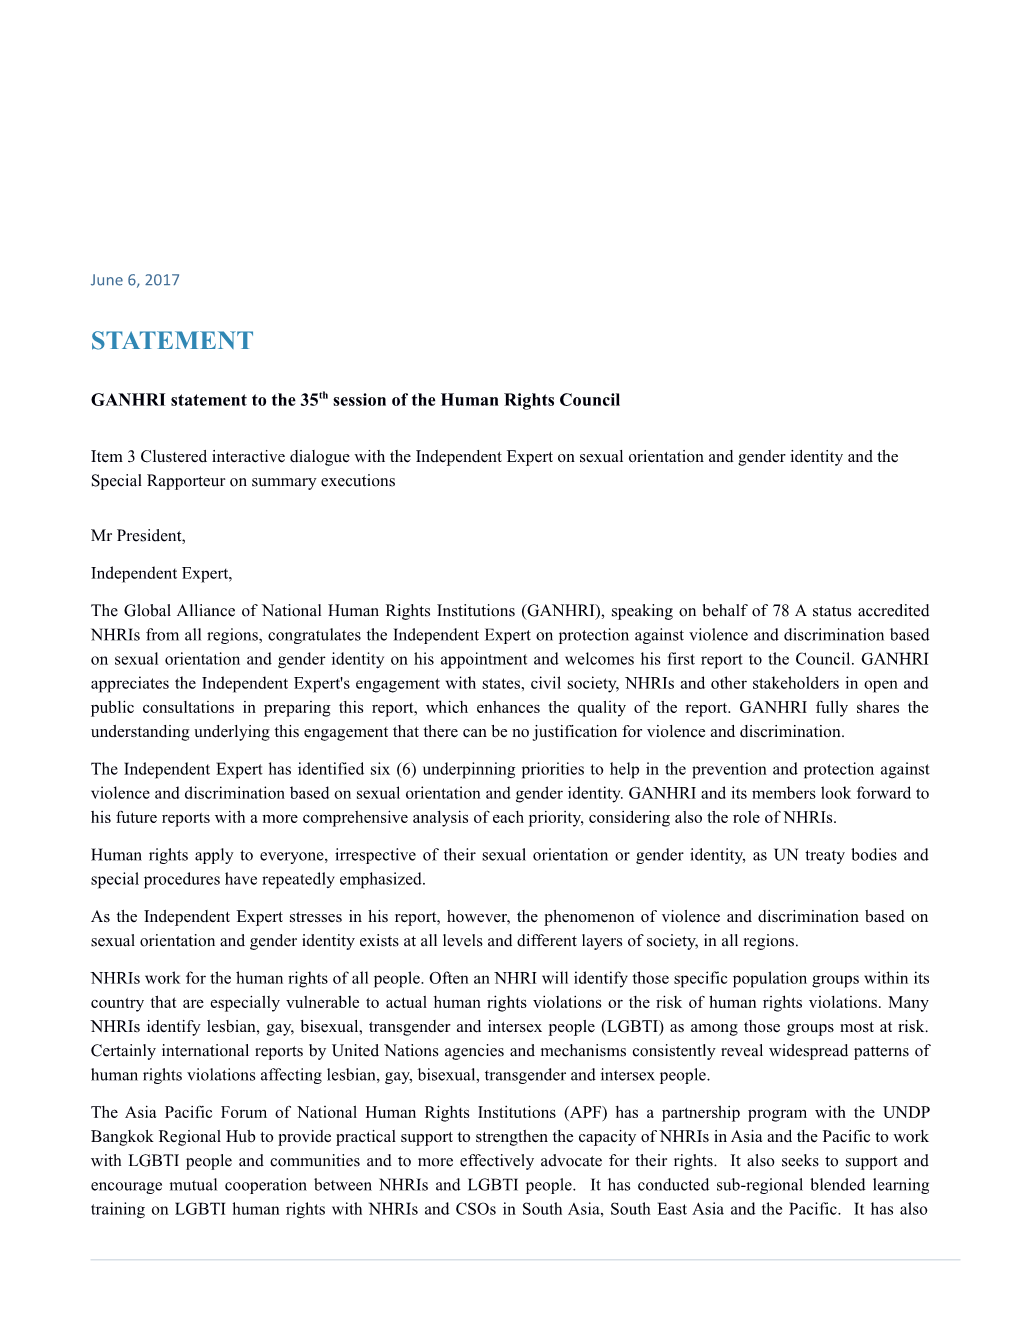 GANHRI Statement to the 35Th Session of the Human Rights Council